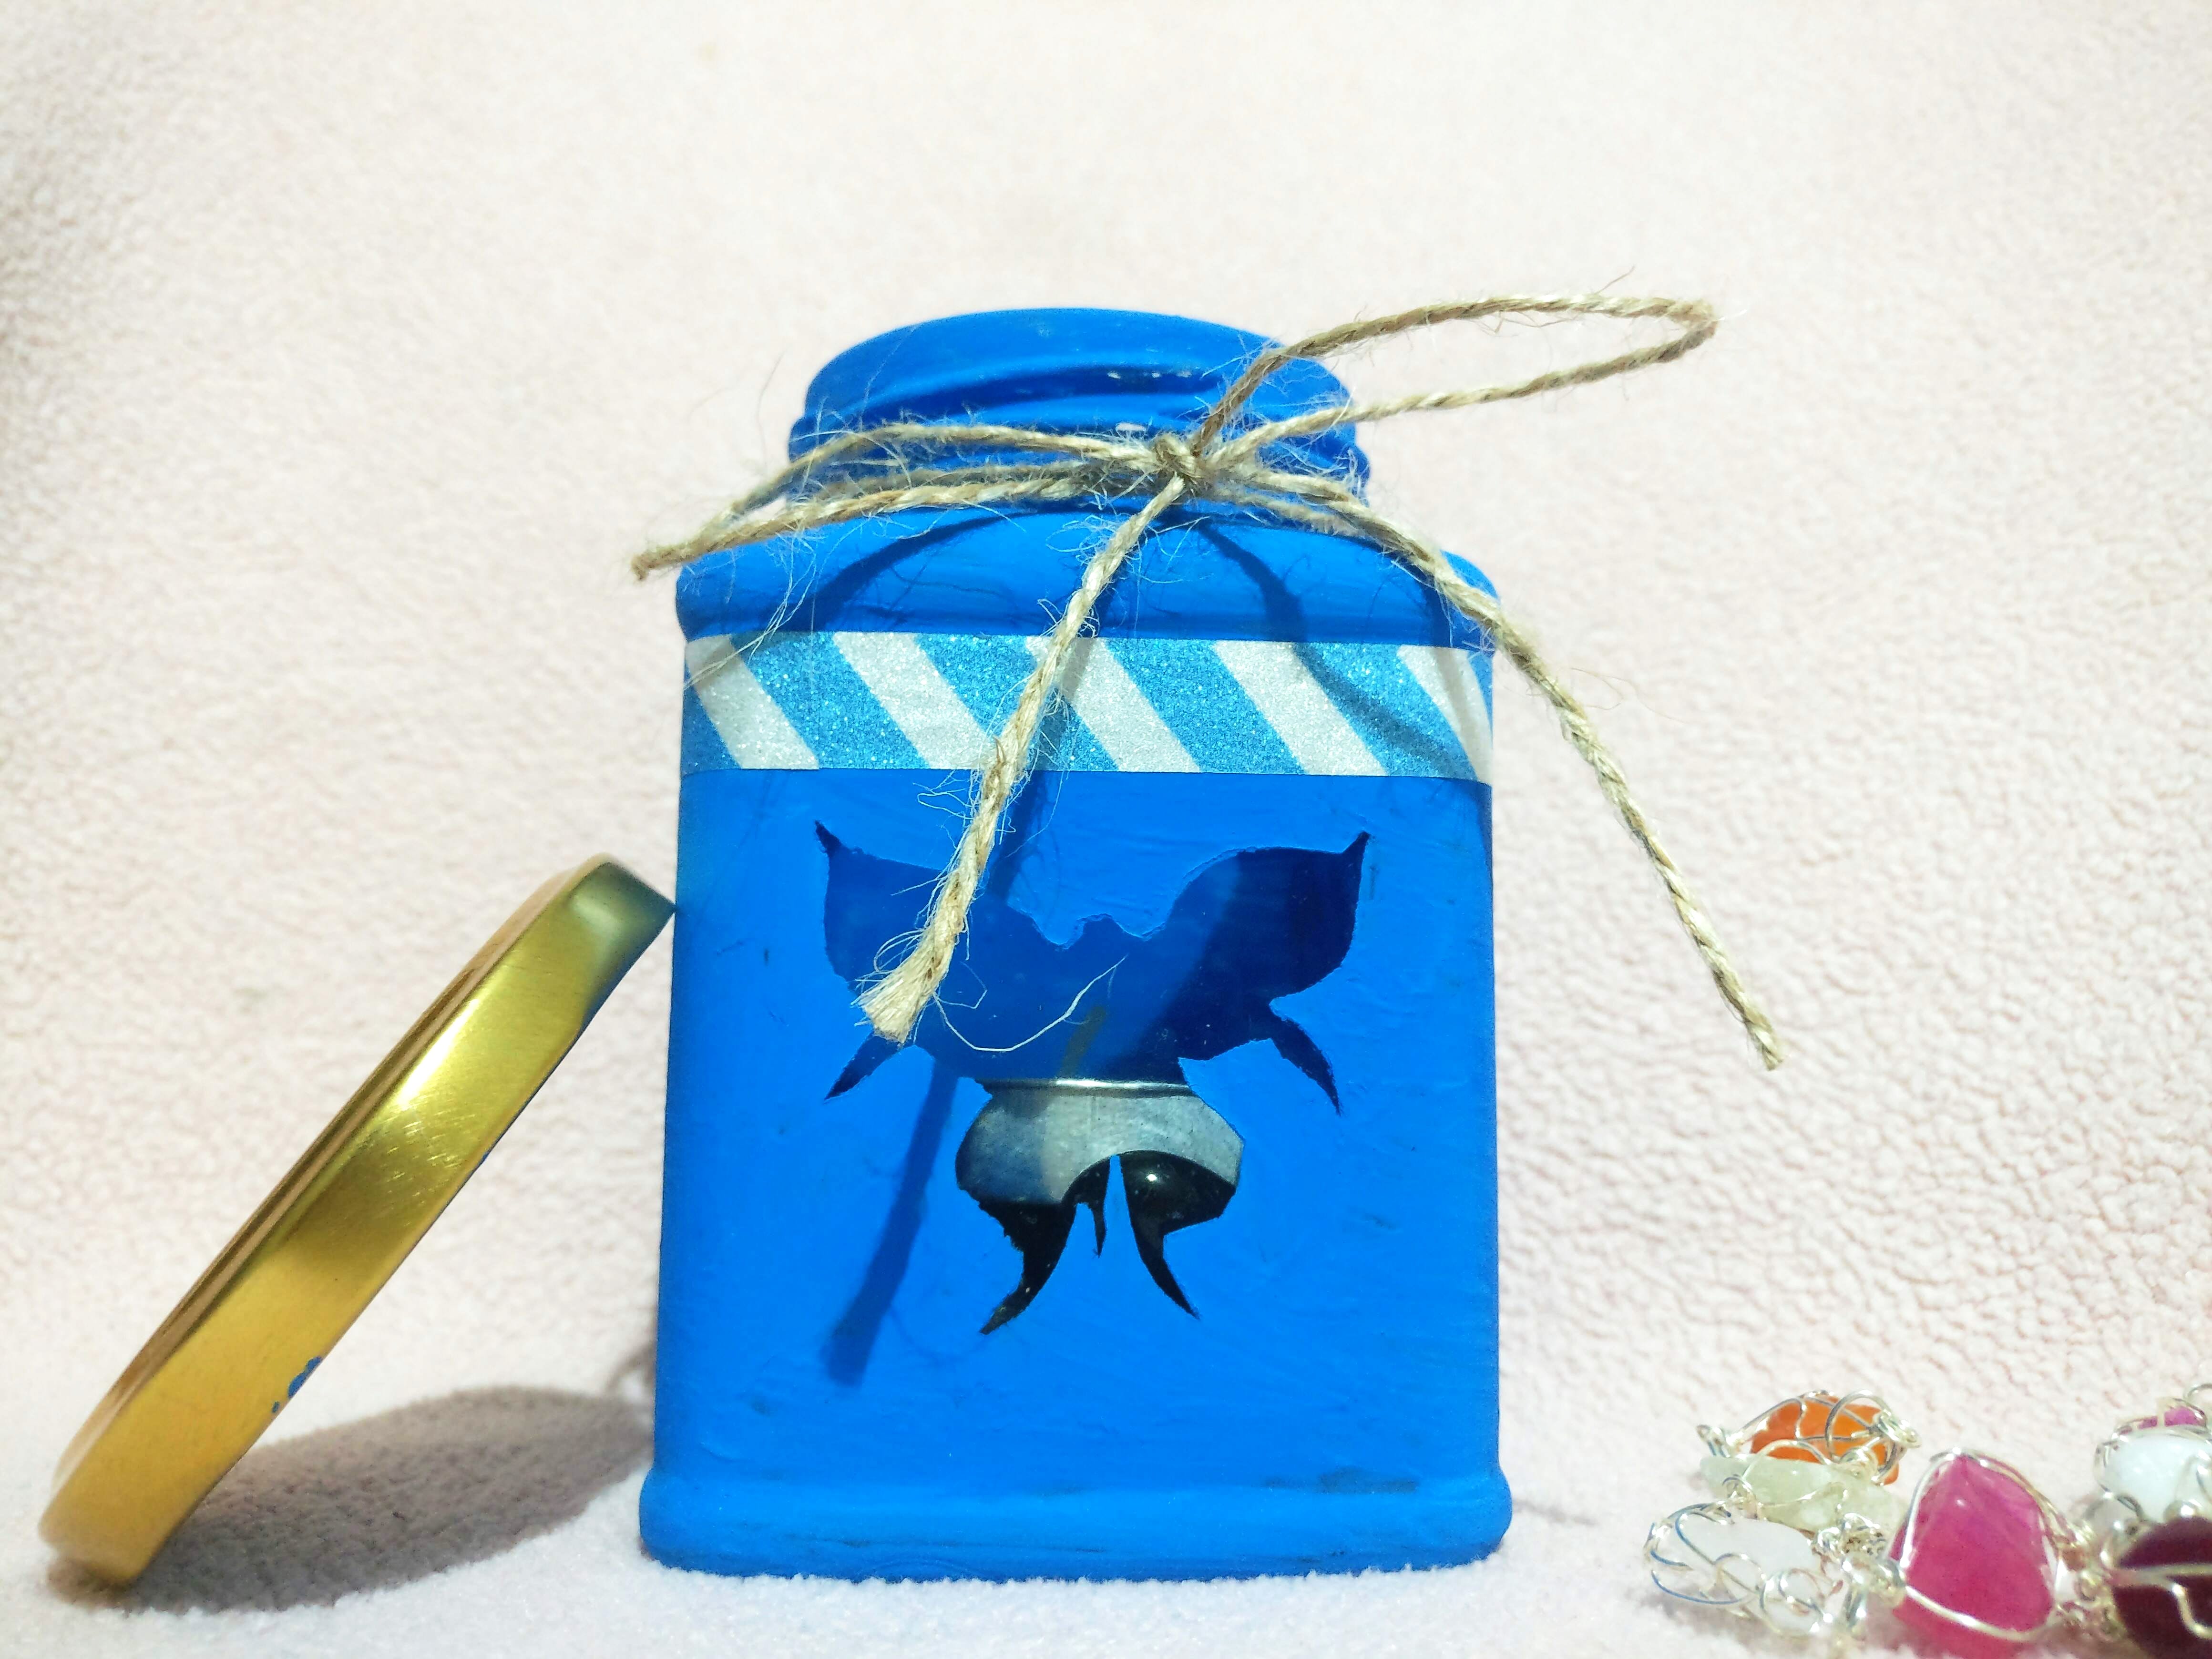 Blue,Cobalt blue,Azure,Turquoise,Party favor,Mason jar,Ribbon,Present,Gift wrapping